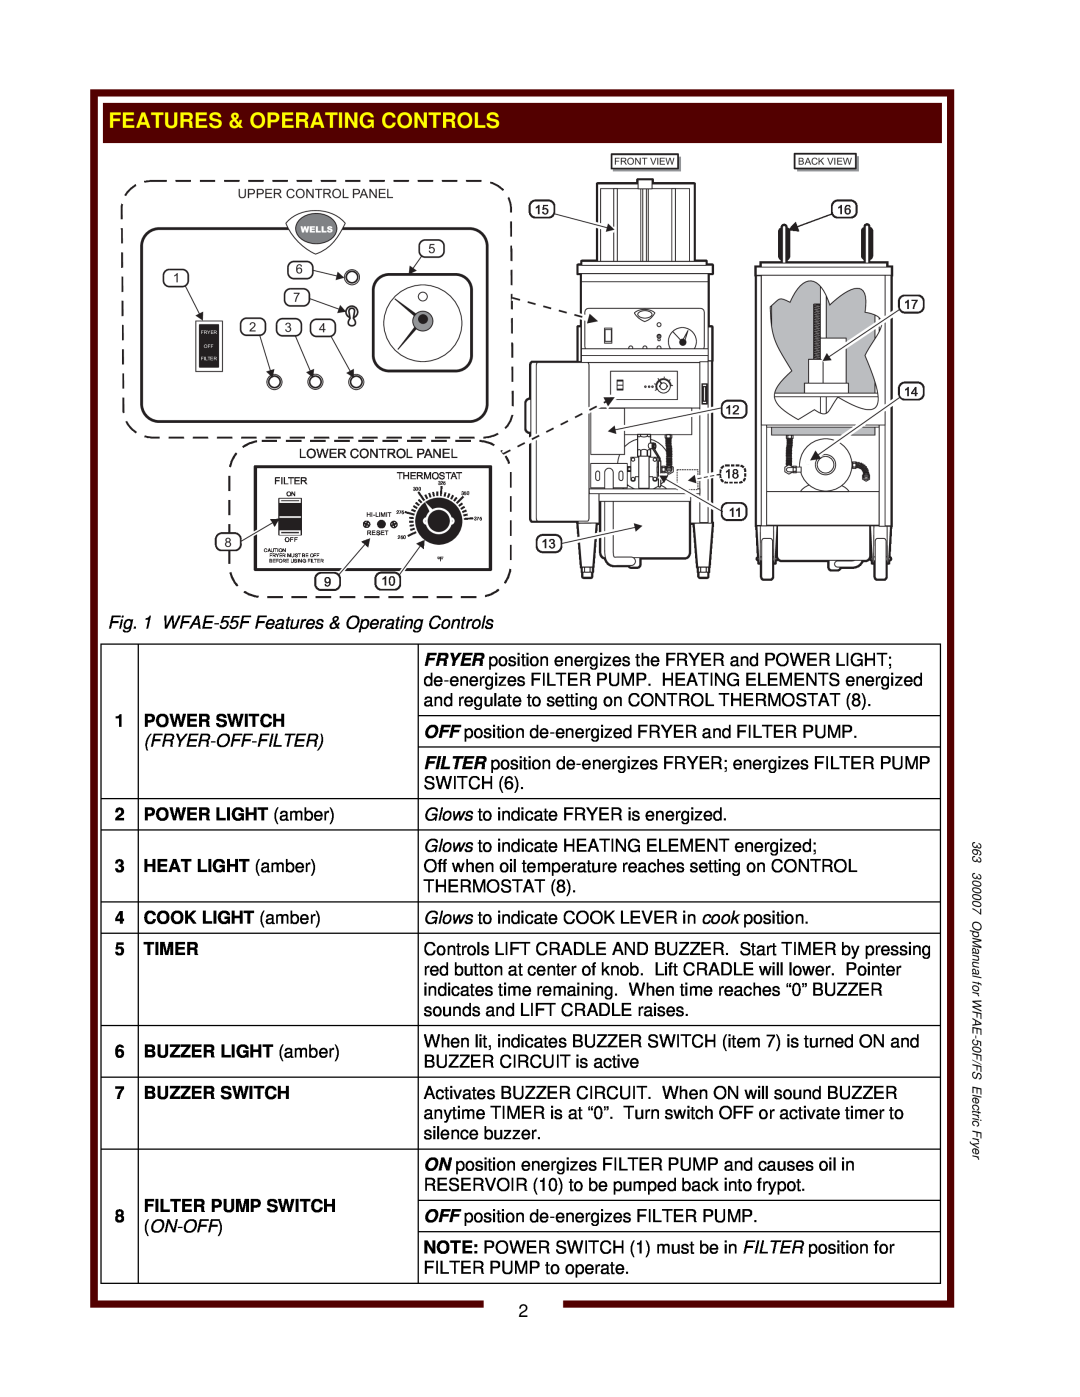 Wells operation manual WFAE-55FFeatures & Operating Controls, Power Switch, Fryer-Off-Filter, On-Off 